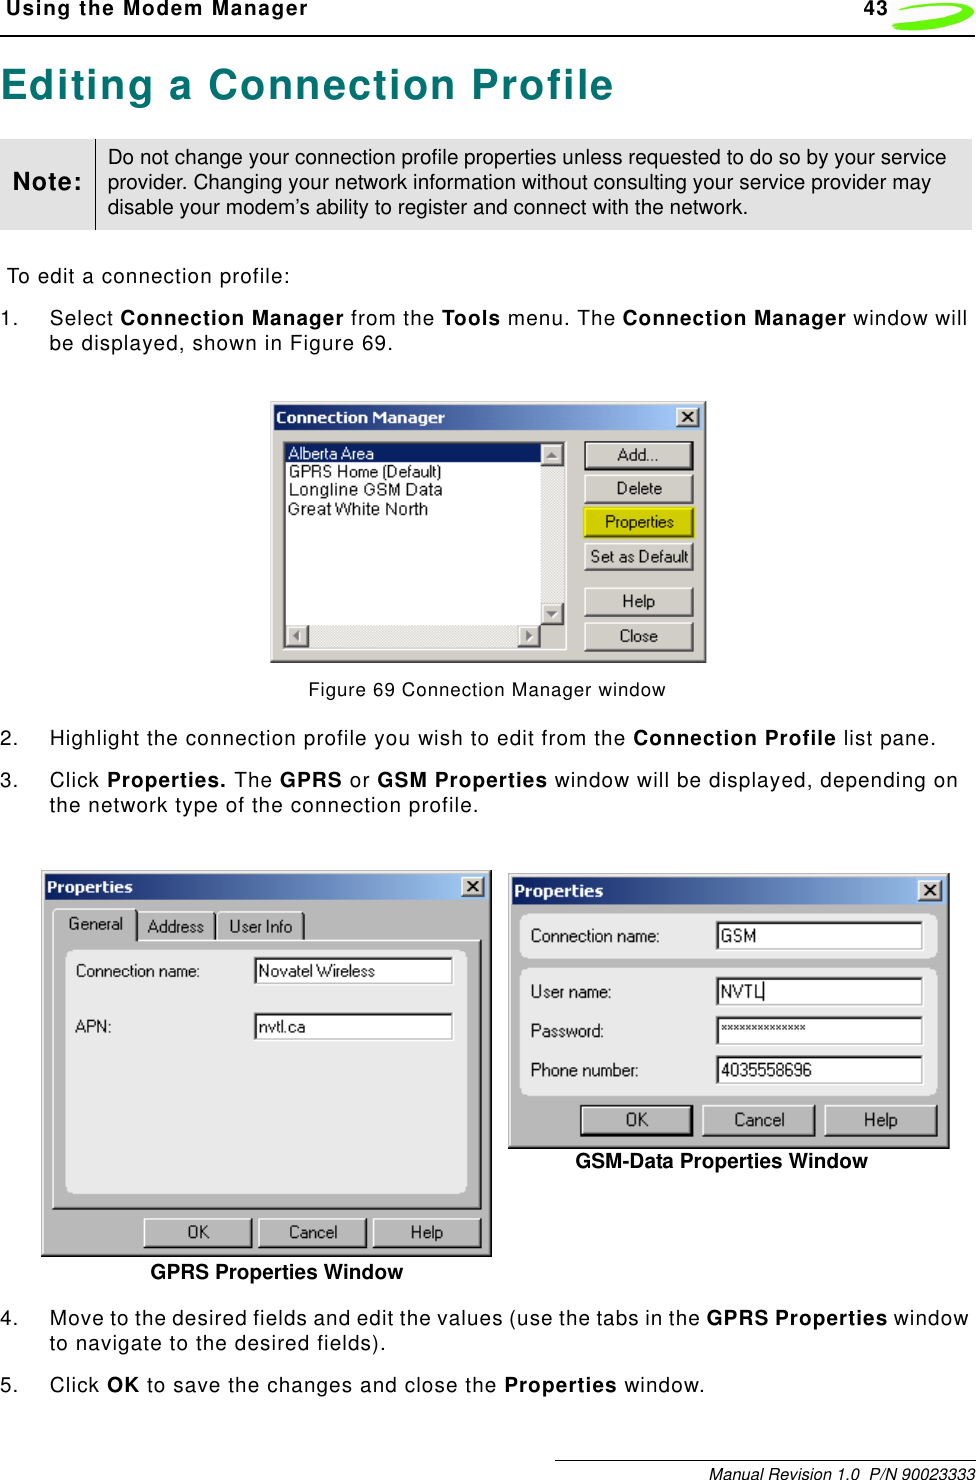  Using the Modem Manager 43Manual Revision 1.0  P/N 90023333Editing a Connection Profile To edit a connection profile:1. Select Connection Manager from the Tools menu. The Connection Manager window will be displayed, shown in Figure 69.Figure 69 Connection Manager window2. Highlight the connection profile you wish to edit from the Connection Profile list pane.3. Click Properties. The GPRS or GSM Properties window will be displayed, depending on the network type of the connection profile.4. Move to the desired fields and edit the values (use the tabs in the GPRS Properties window to navigate to the desired fields).5. Click OK to save the changes and close the Properties window.Note: Do not change your connection profile properties unless requested to do so by your service provider. Changing your network information without consulting your service provider may disable your modem’s ability to register and connect with the network.GPRS Properties WindowGSM-Data Properties Window